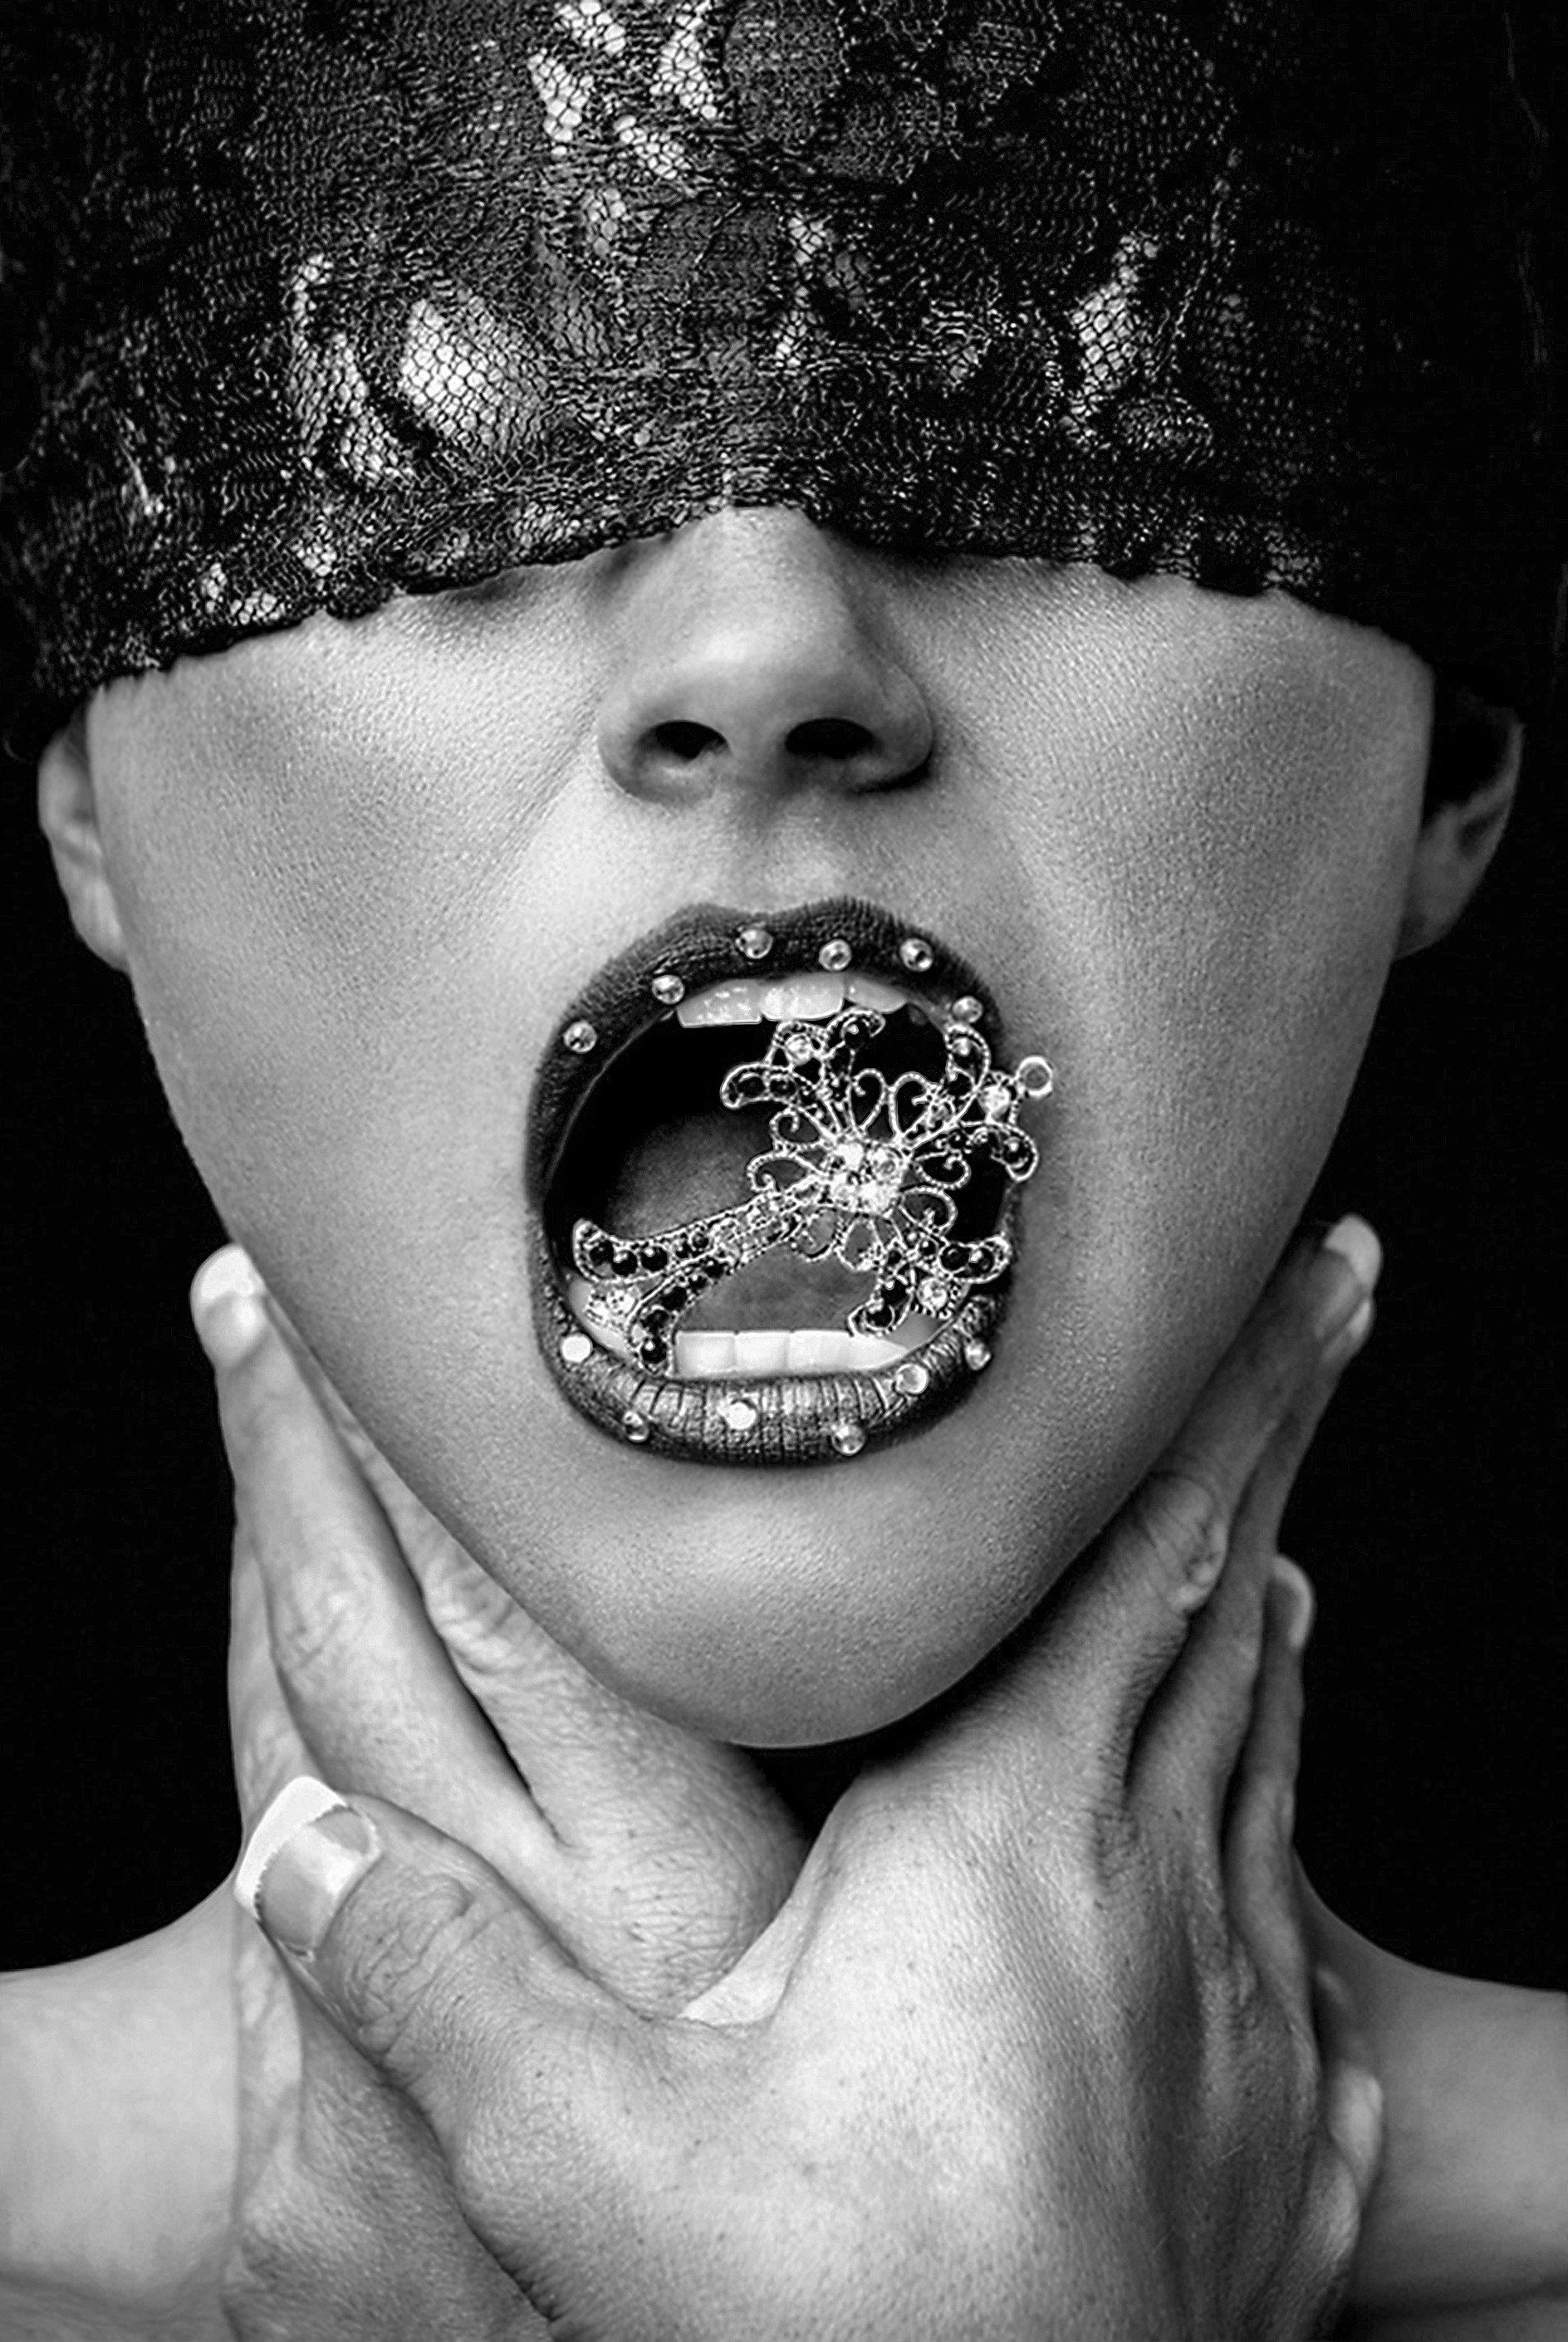 women grayscale masks open mouth makeup jewelry faces manipulation 1888x2820 wallpaper High Quality Wallpaper, High Definition Wallpaper